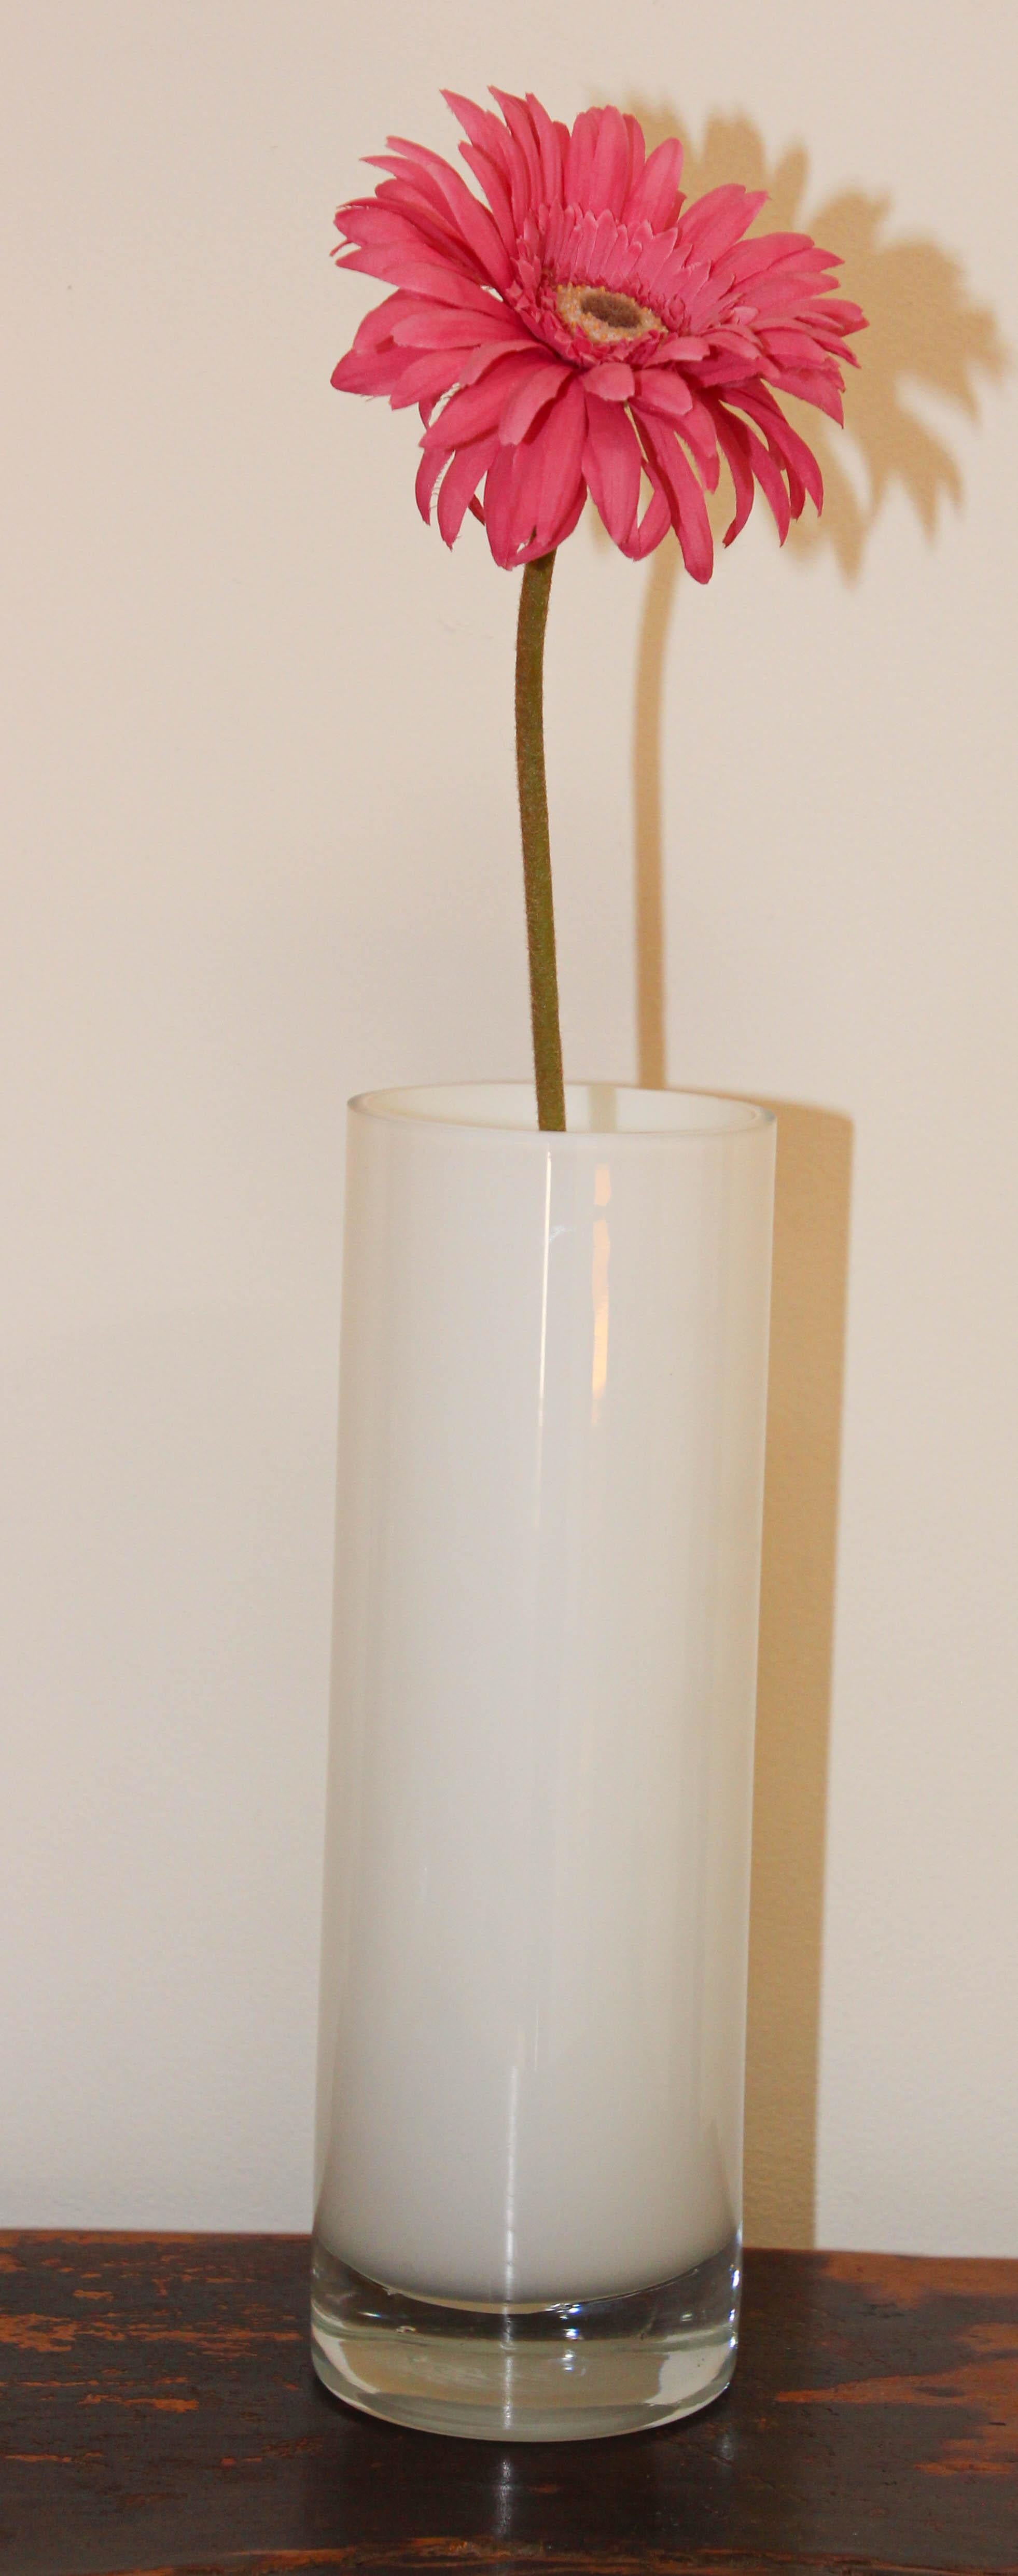 Modernist Minimalist white glass flower vase with clear glass base with some bubbles.
This Minimalist white vase very modern shape will fit any design.
With any flowers arrangement from colorful to just green leaves it will add the modern look to